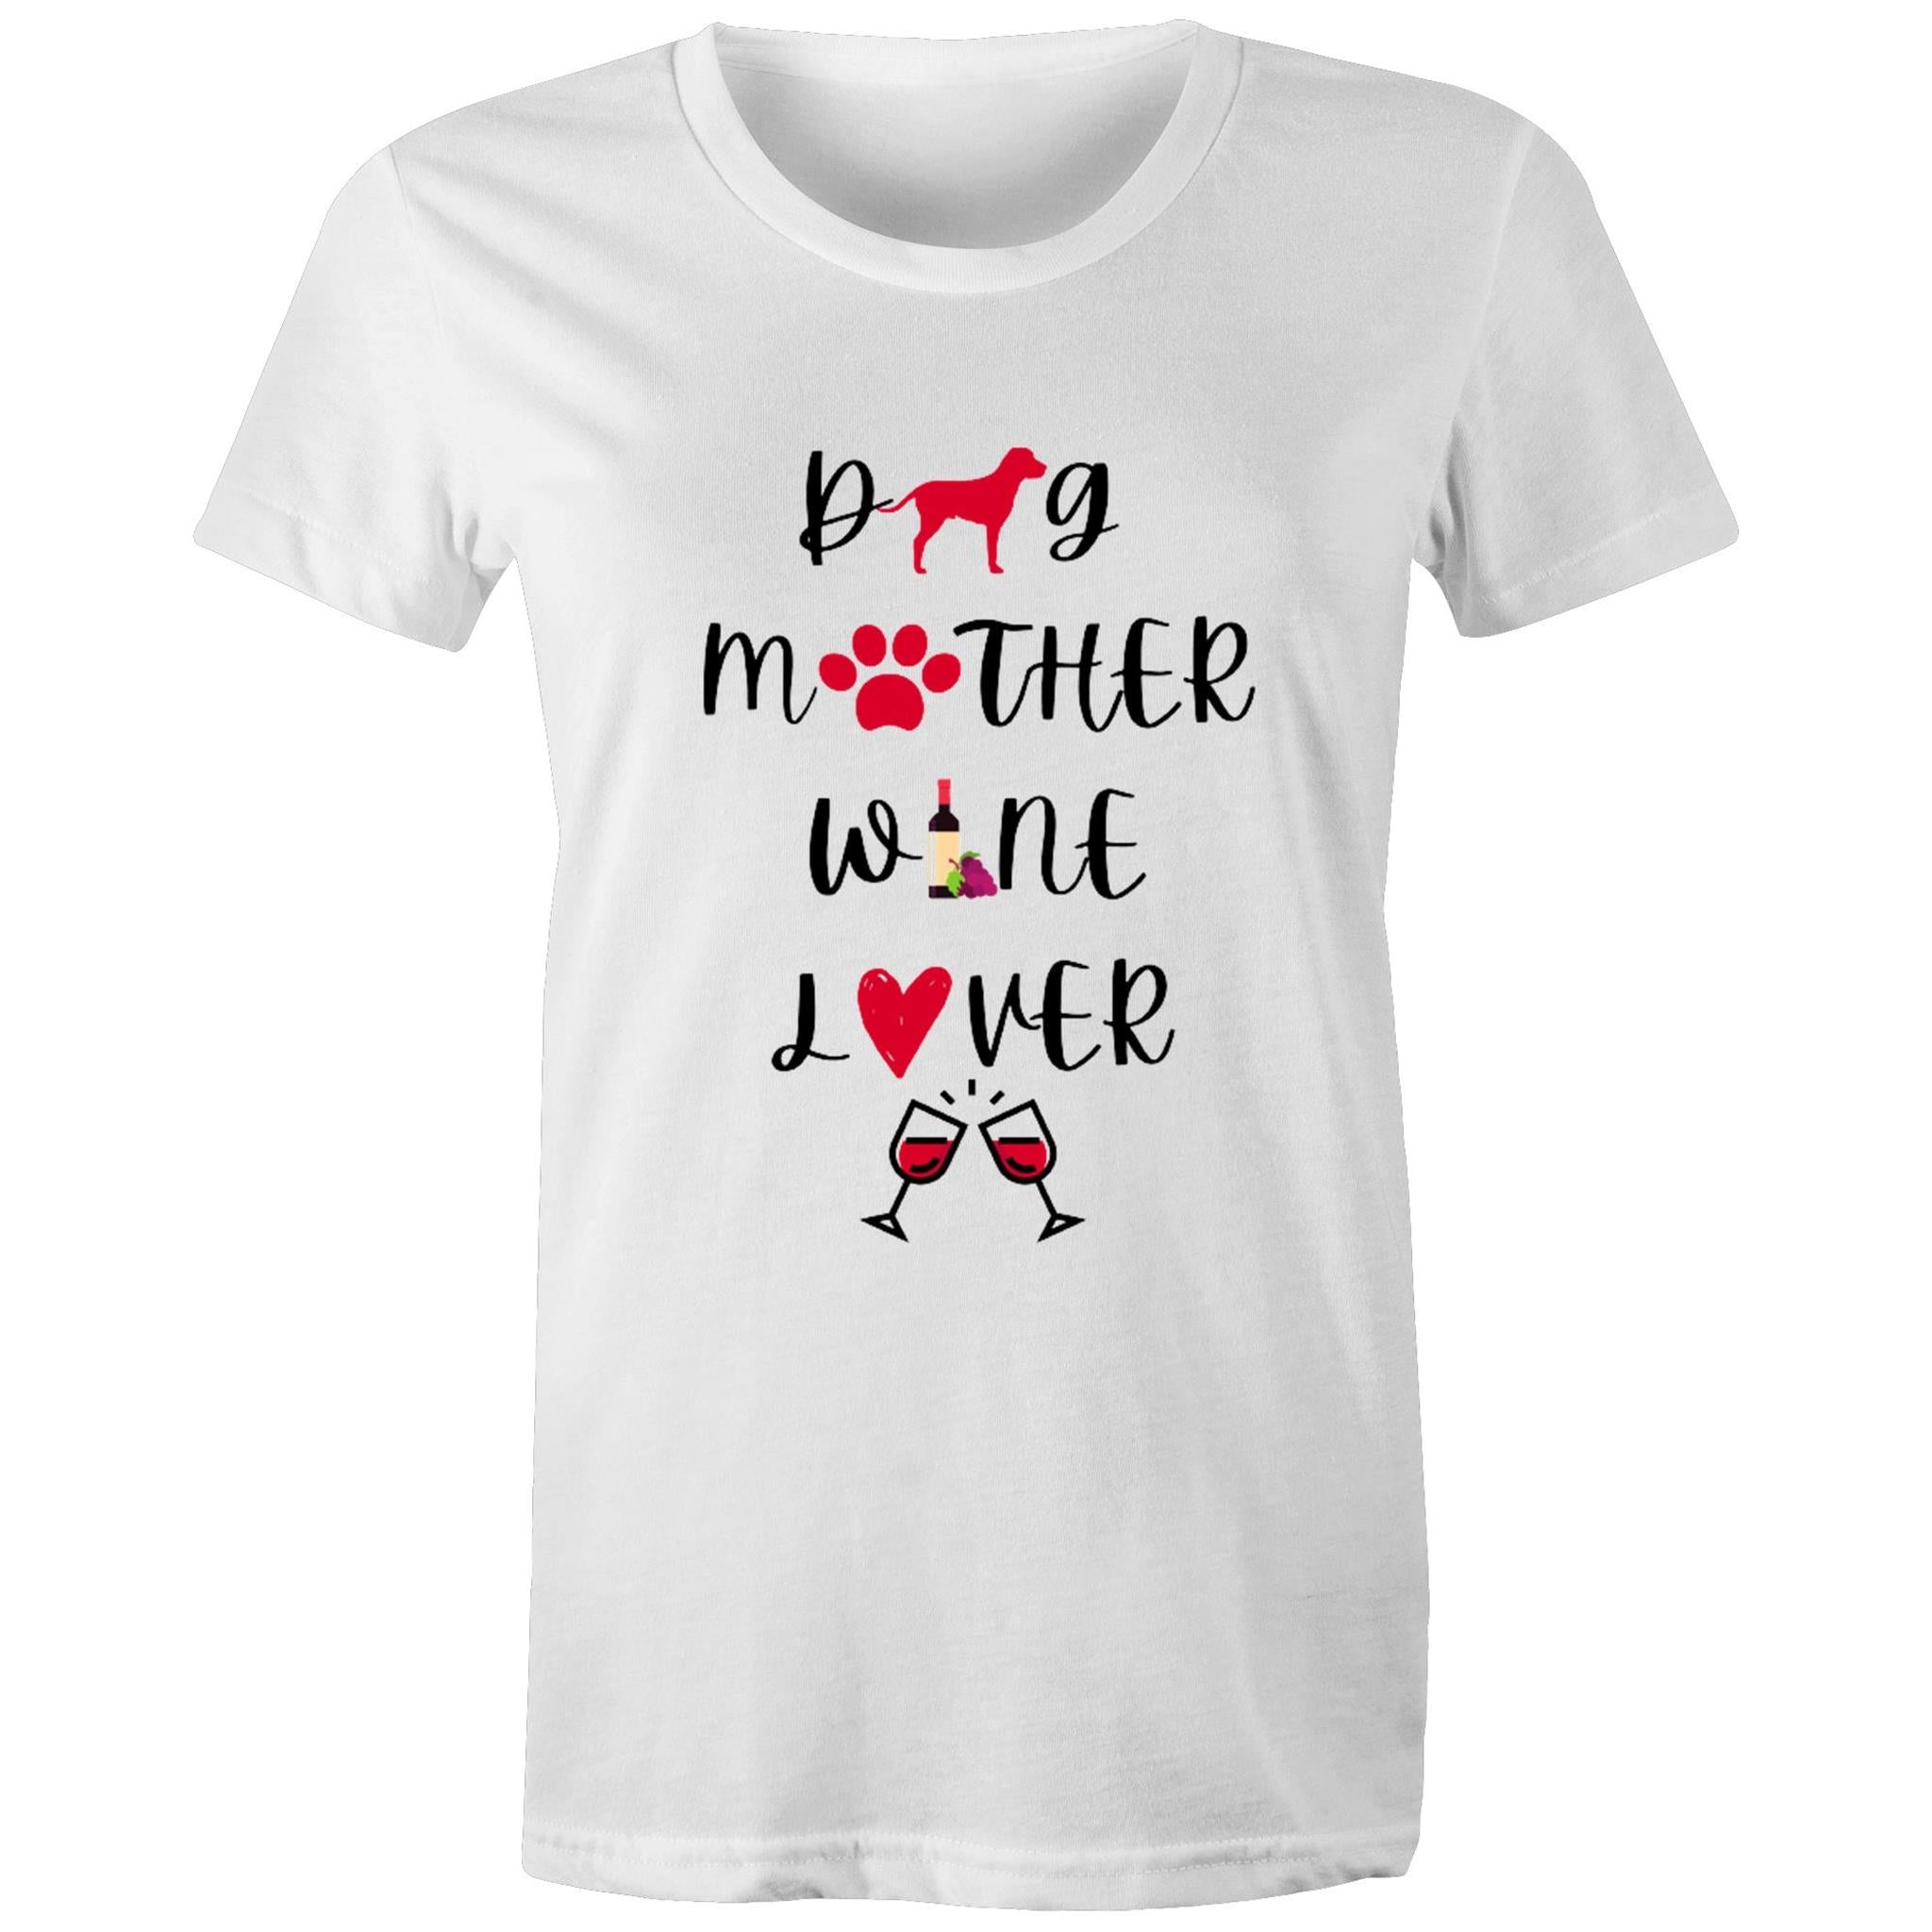 DOG MOTHER WINE LOVER - Women's Maple Tee - 13 COLOURS